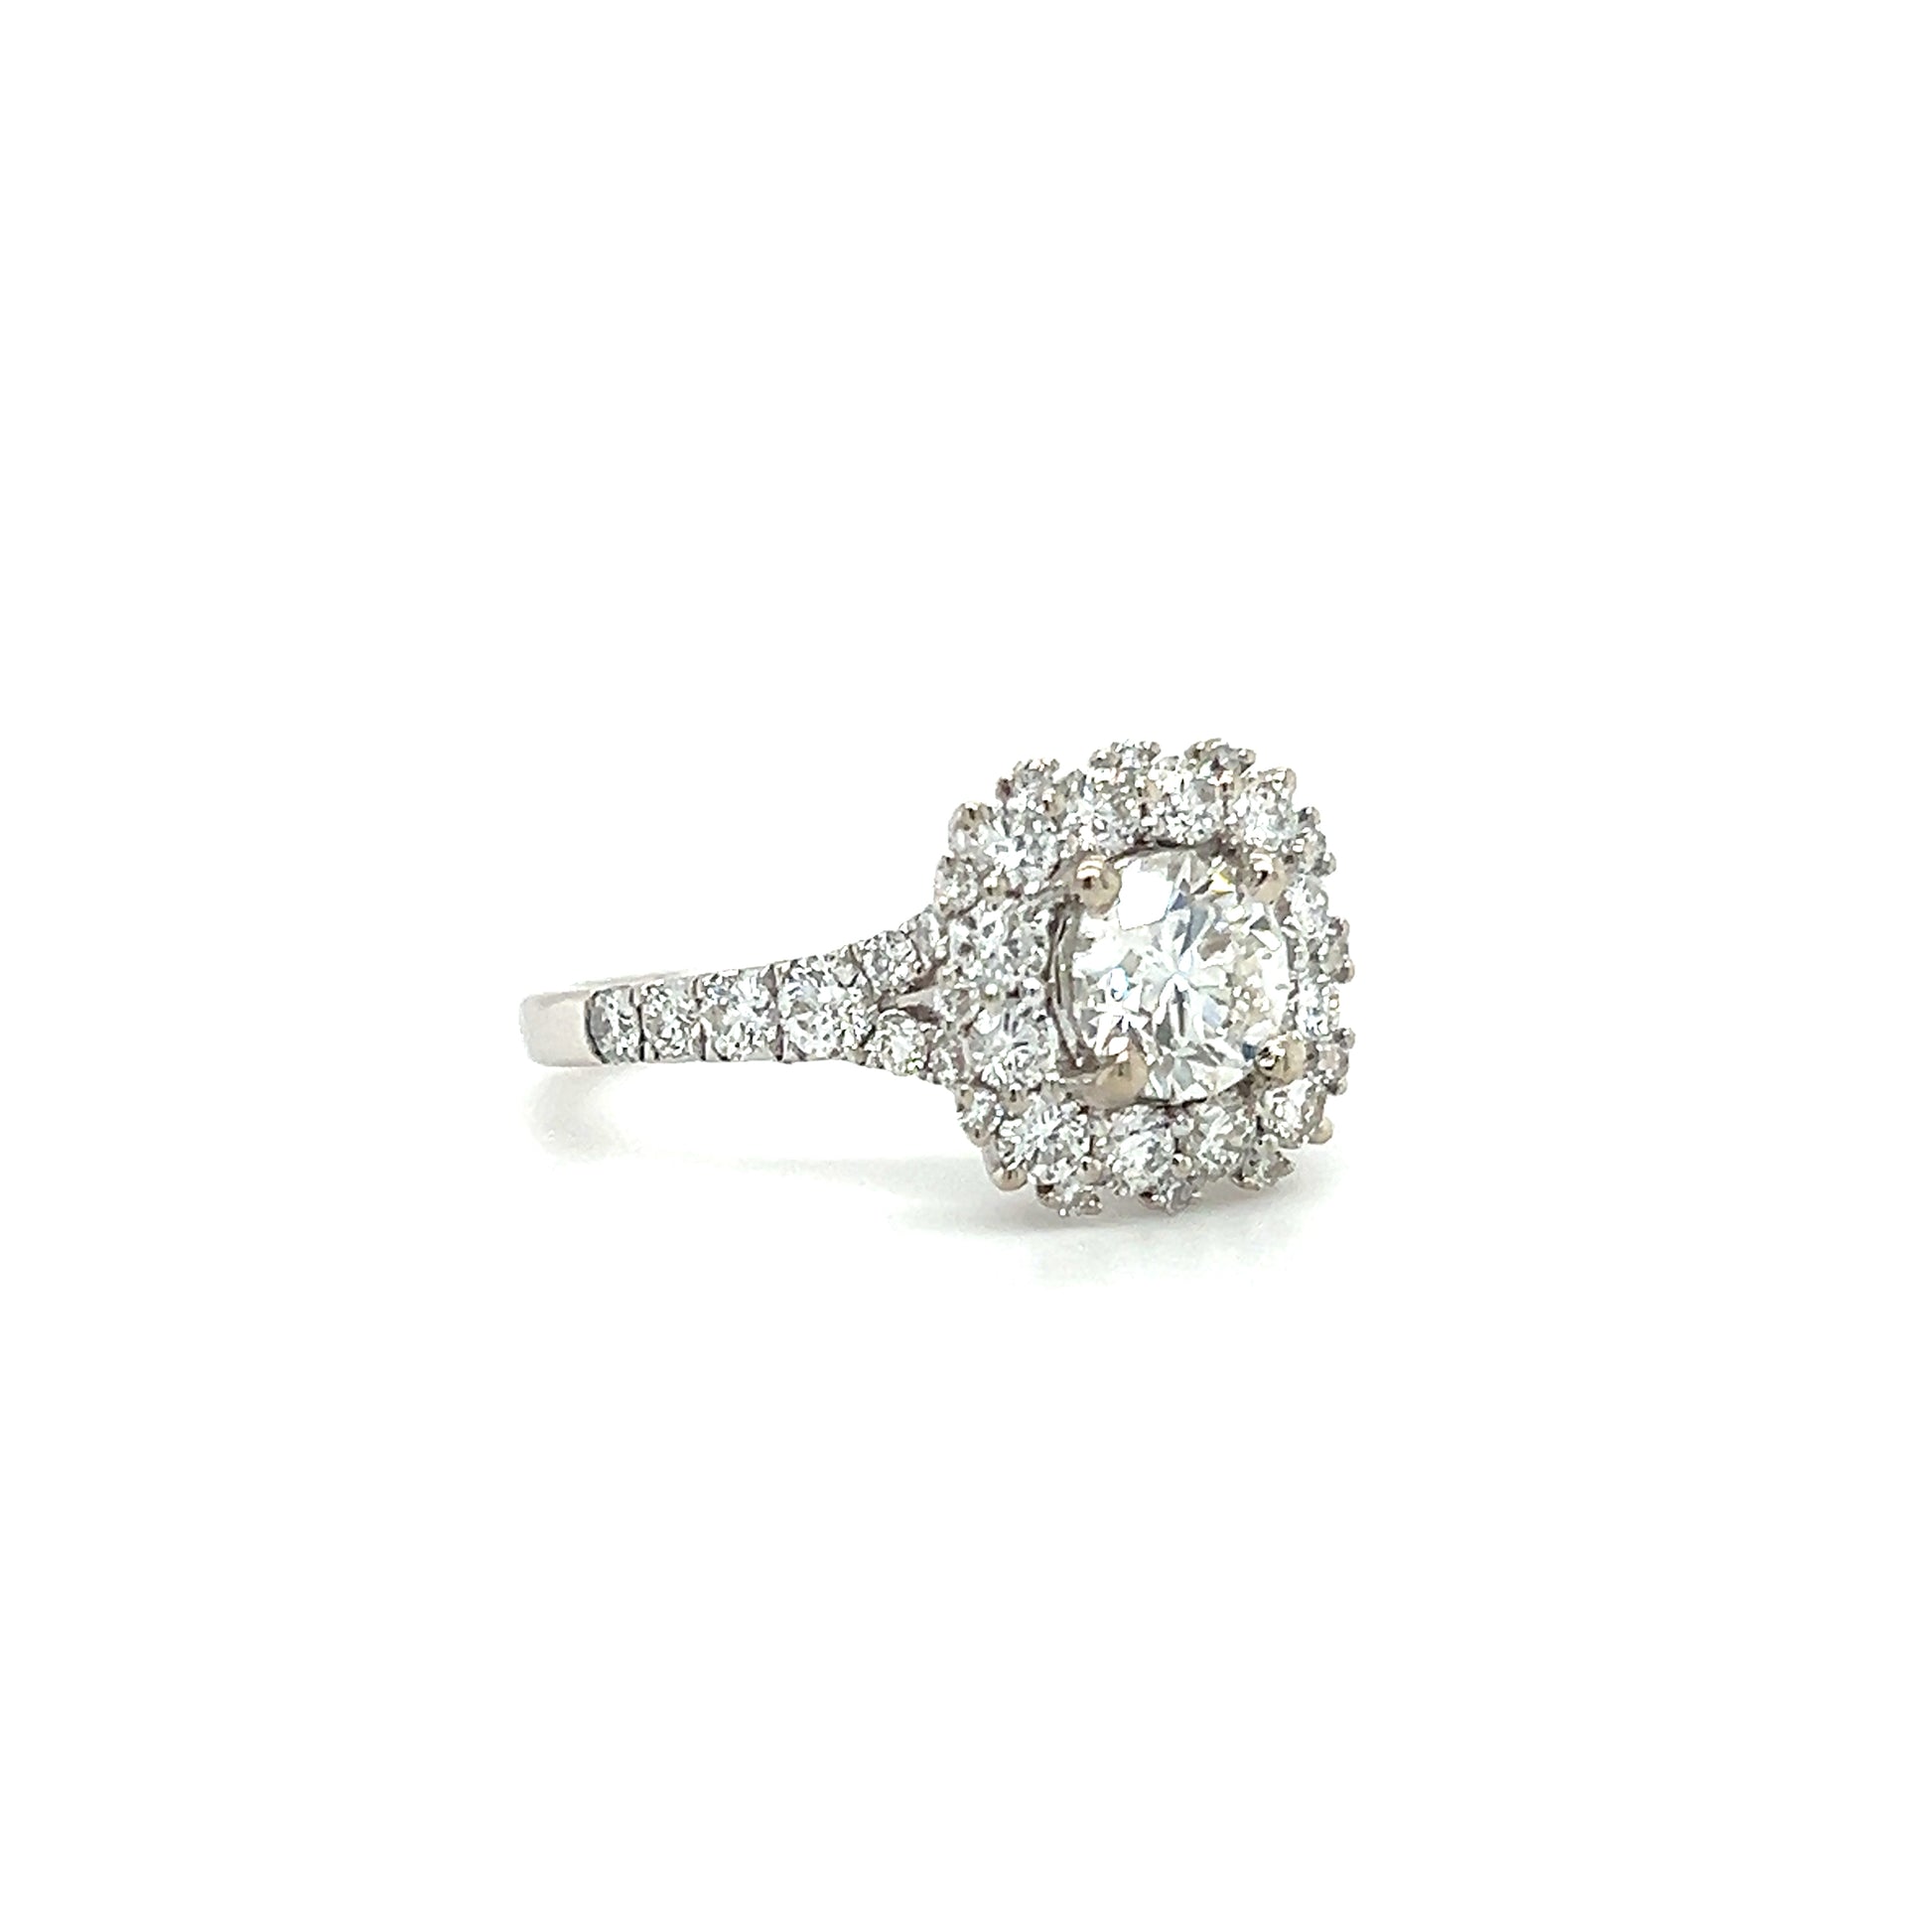 Diamond Halo Ring with 1.66ctw of Diamonds in 14K White Gold Left Side View